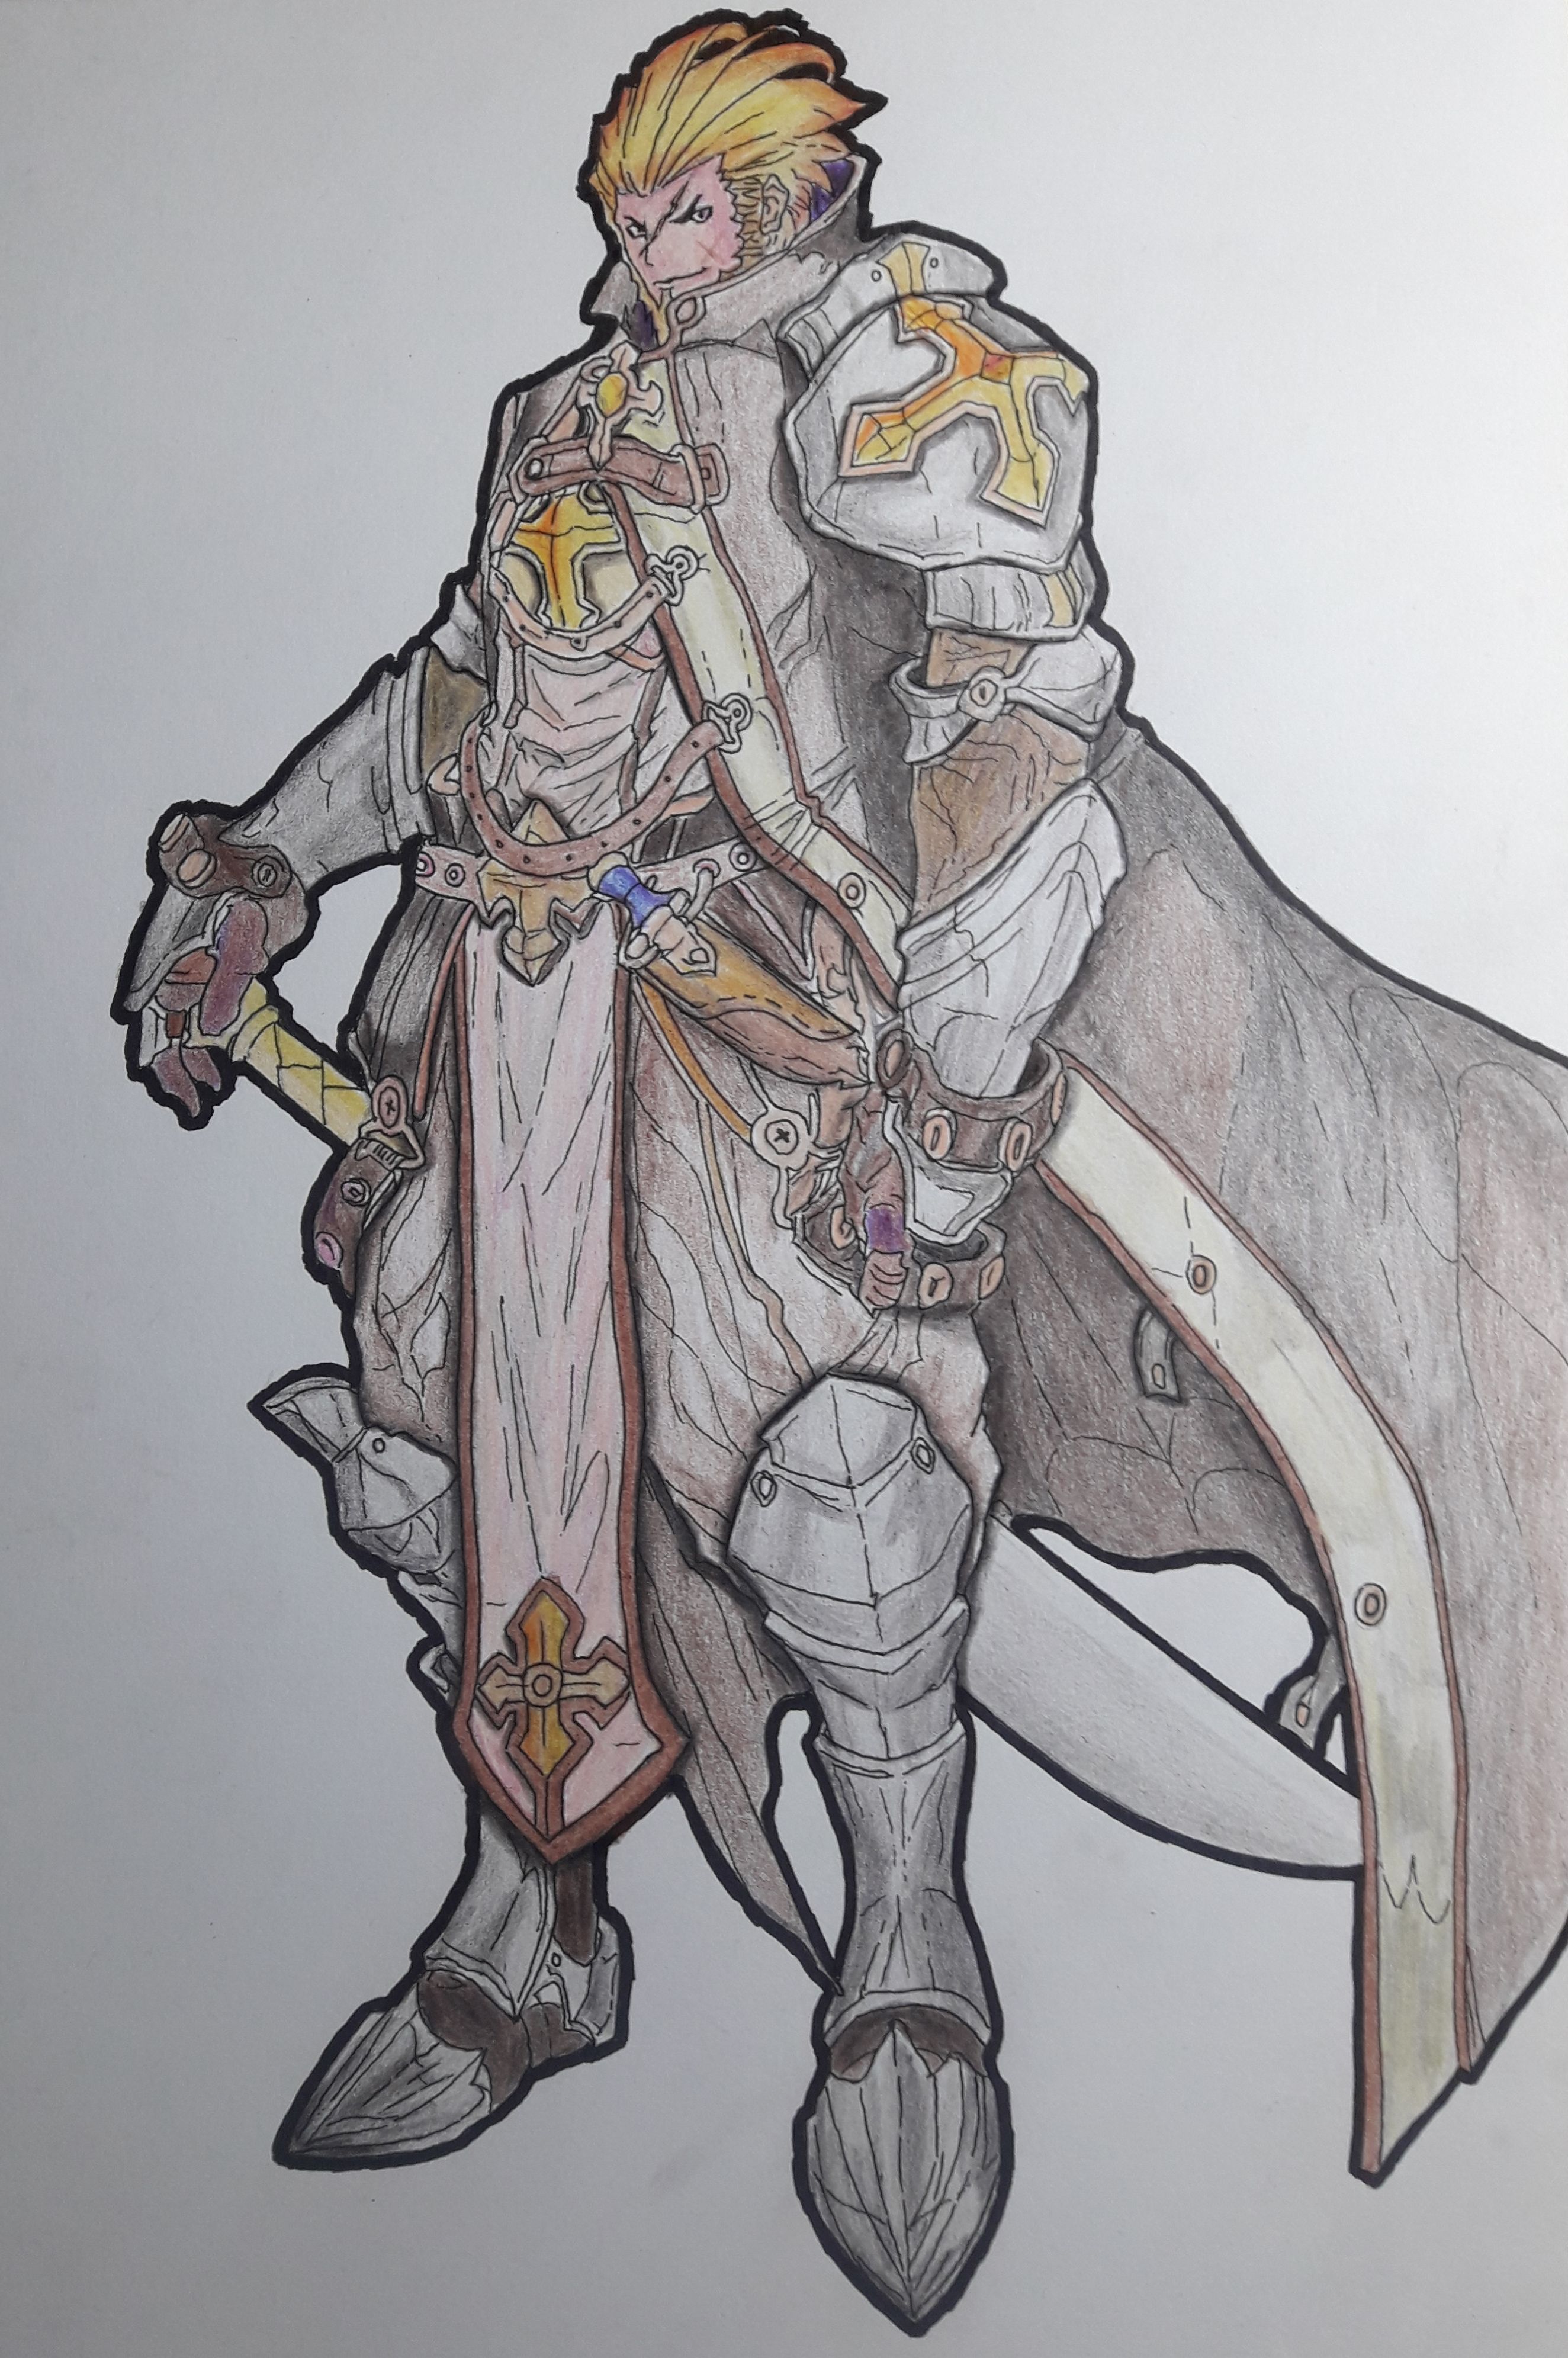 This is my 2nd drawing of Paladin #2, i have posted my first drawing of Pal...